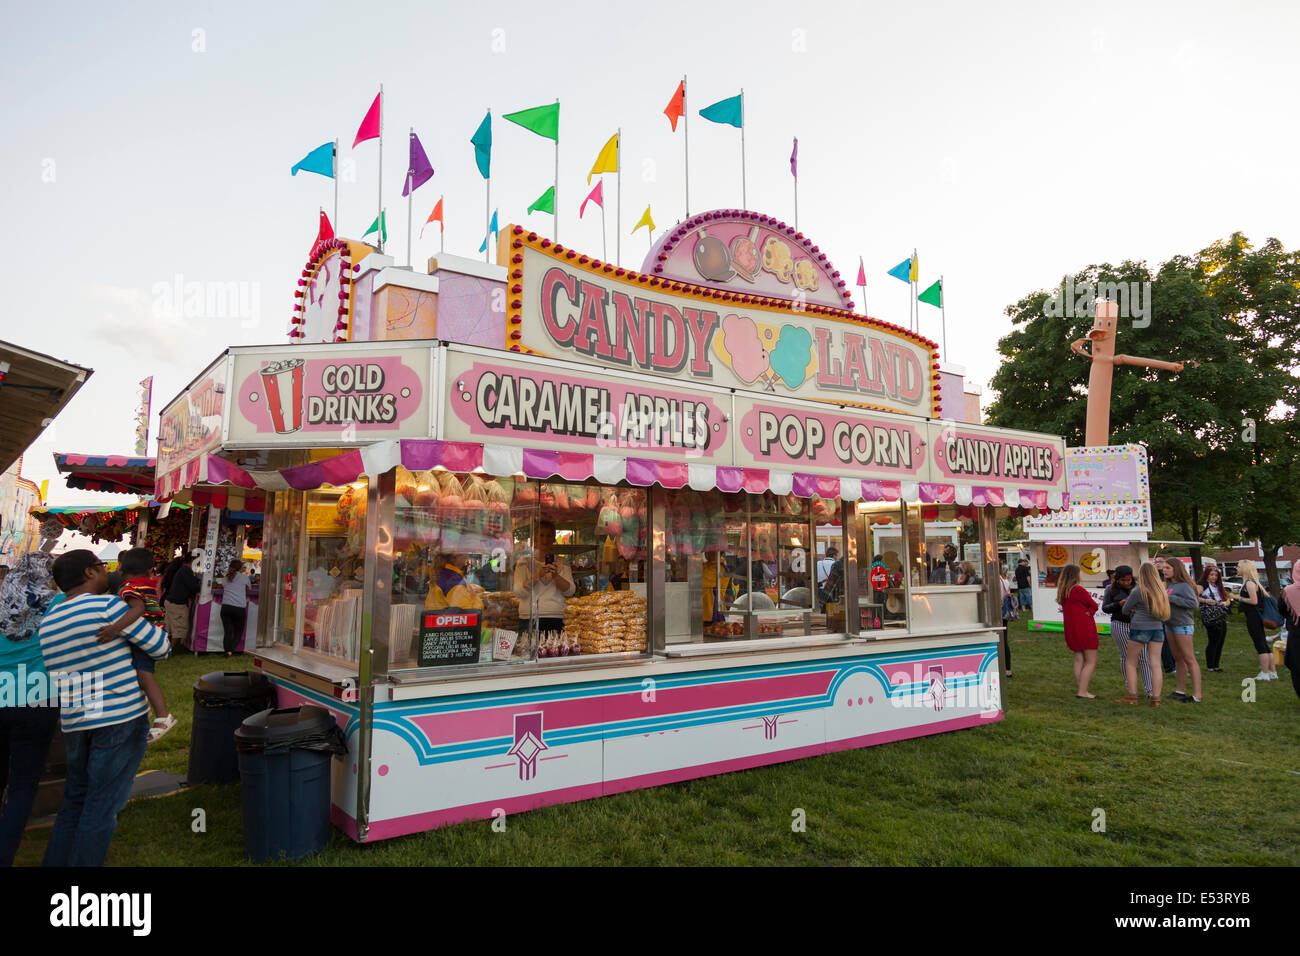 A 'Candy Land' food stand at the 'Sound of Music Festival' at SpencerSmith  Park in Burlington, Ontario, Canada Stock Photo - Alamy